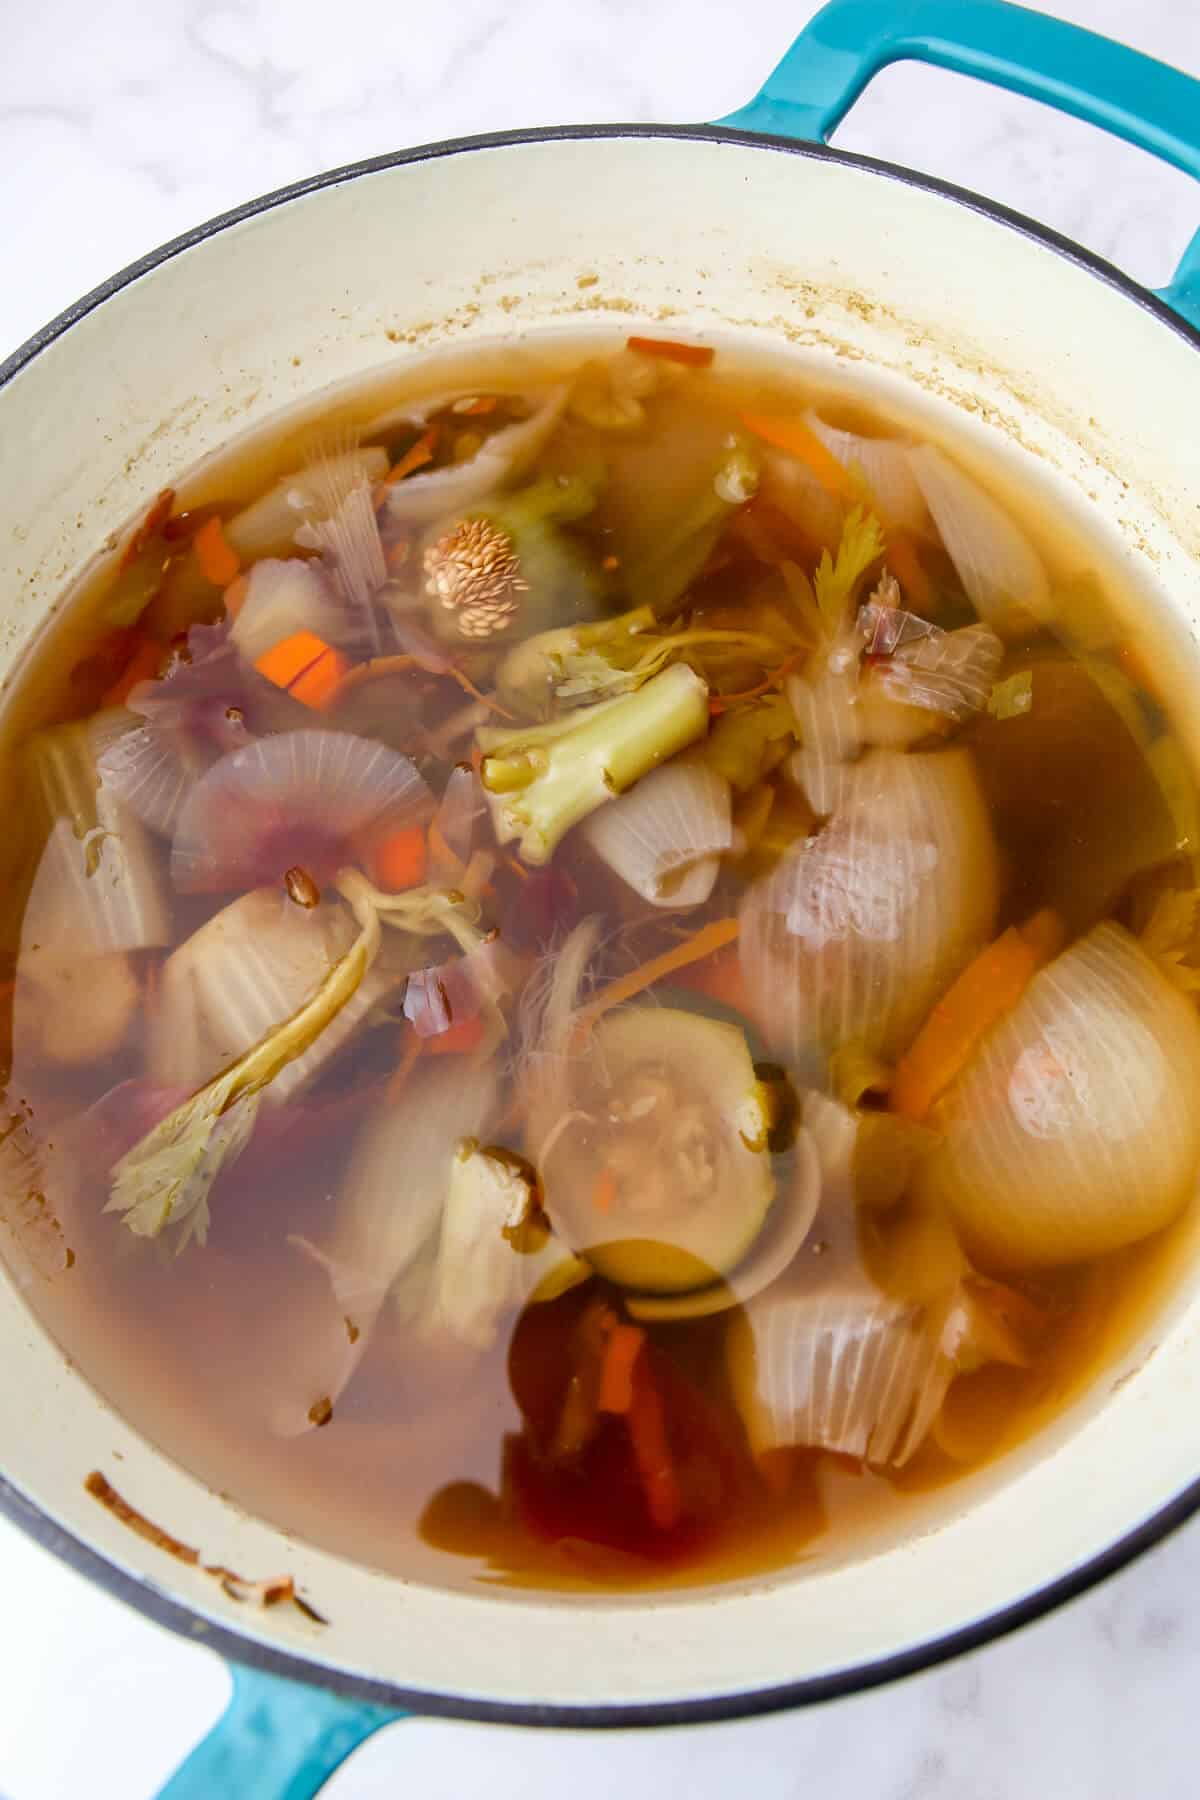 The veggie broth after it has simmered for 2 hours.